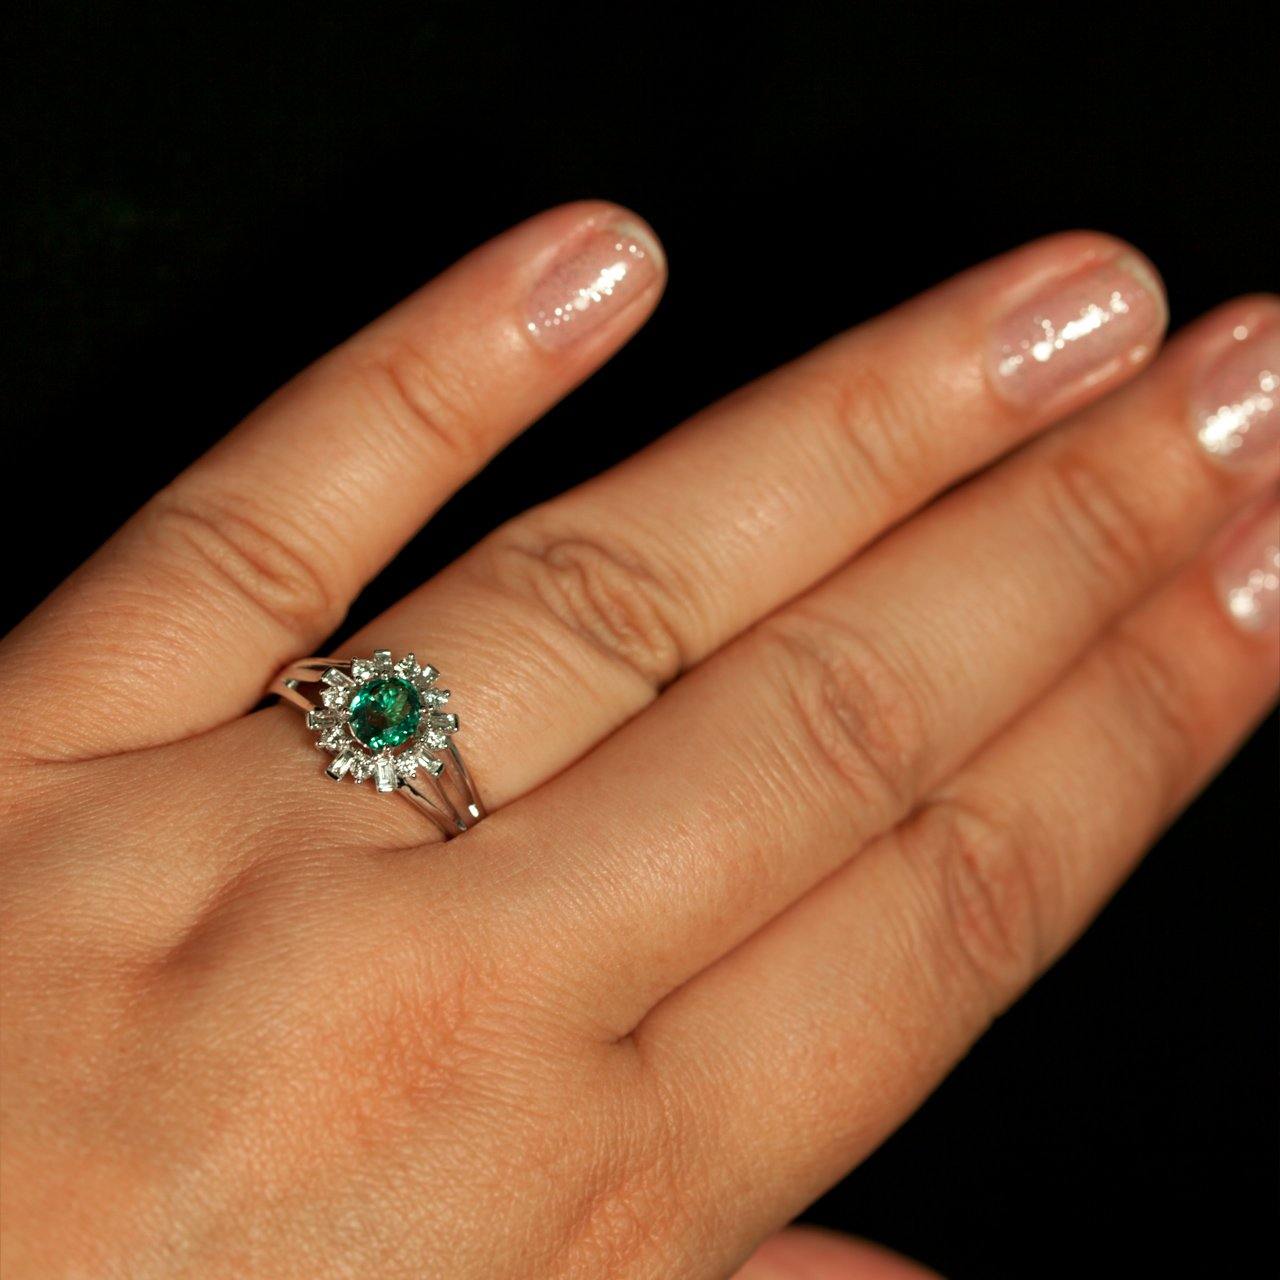 Woman's hand showcasing a platinum ring with a 0.78ct natural alexandrite and diamond halo